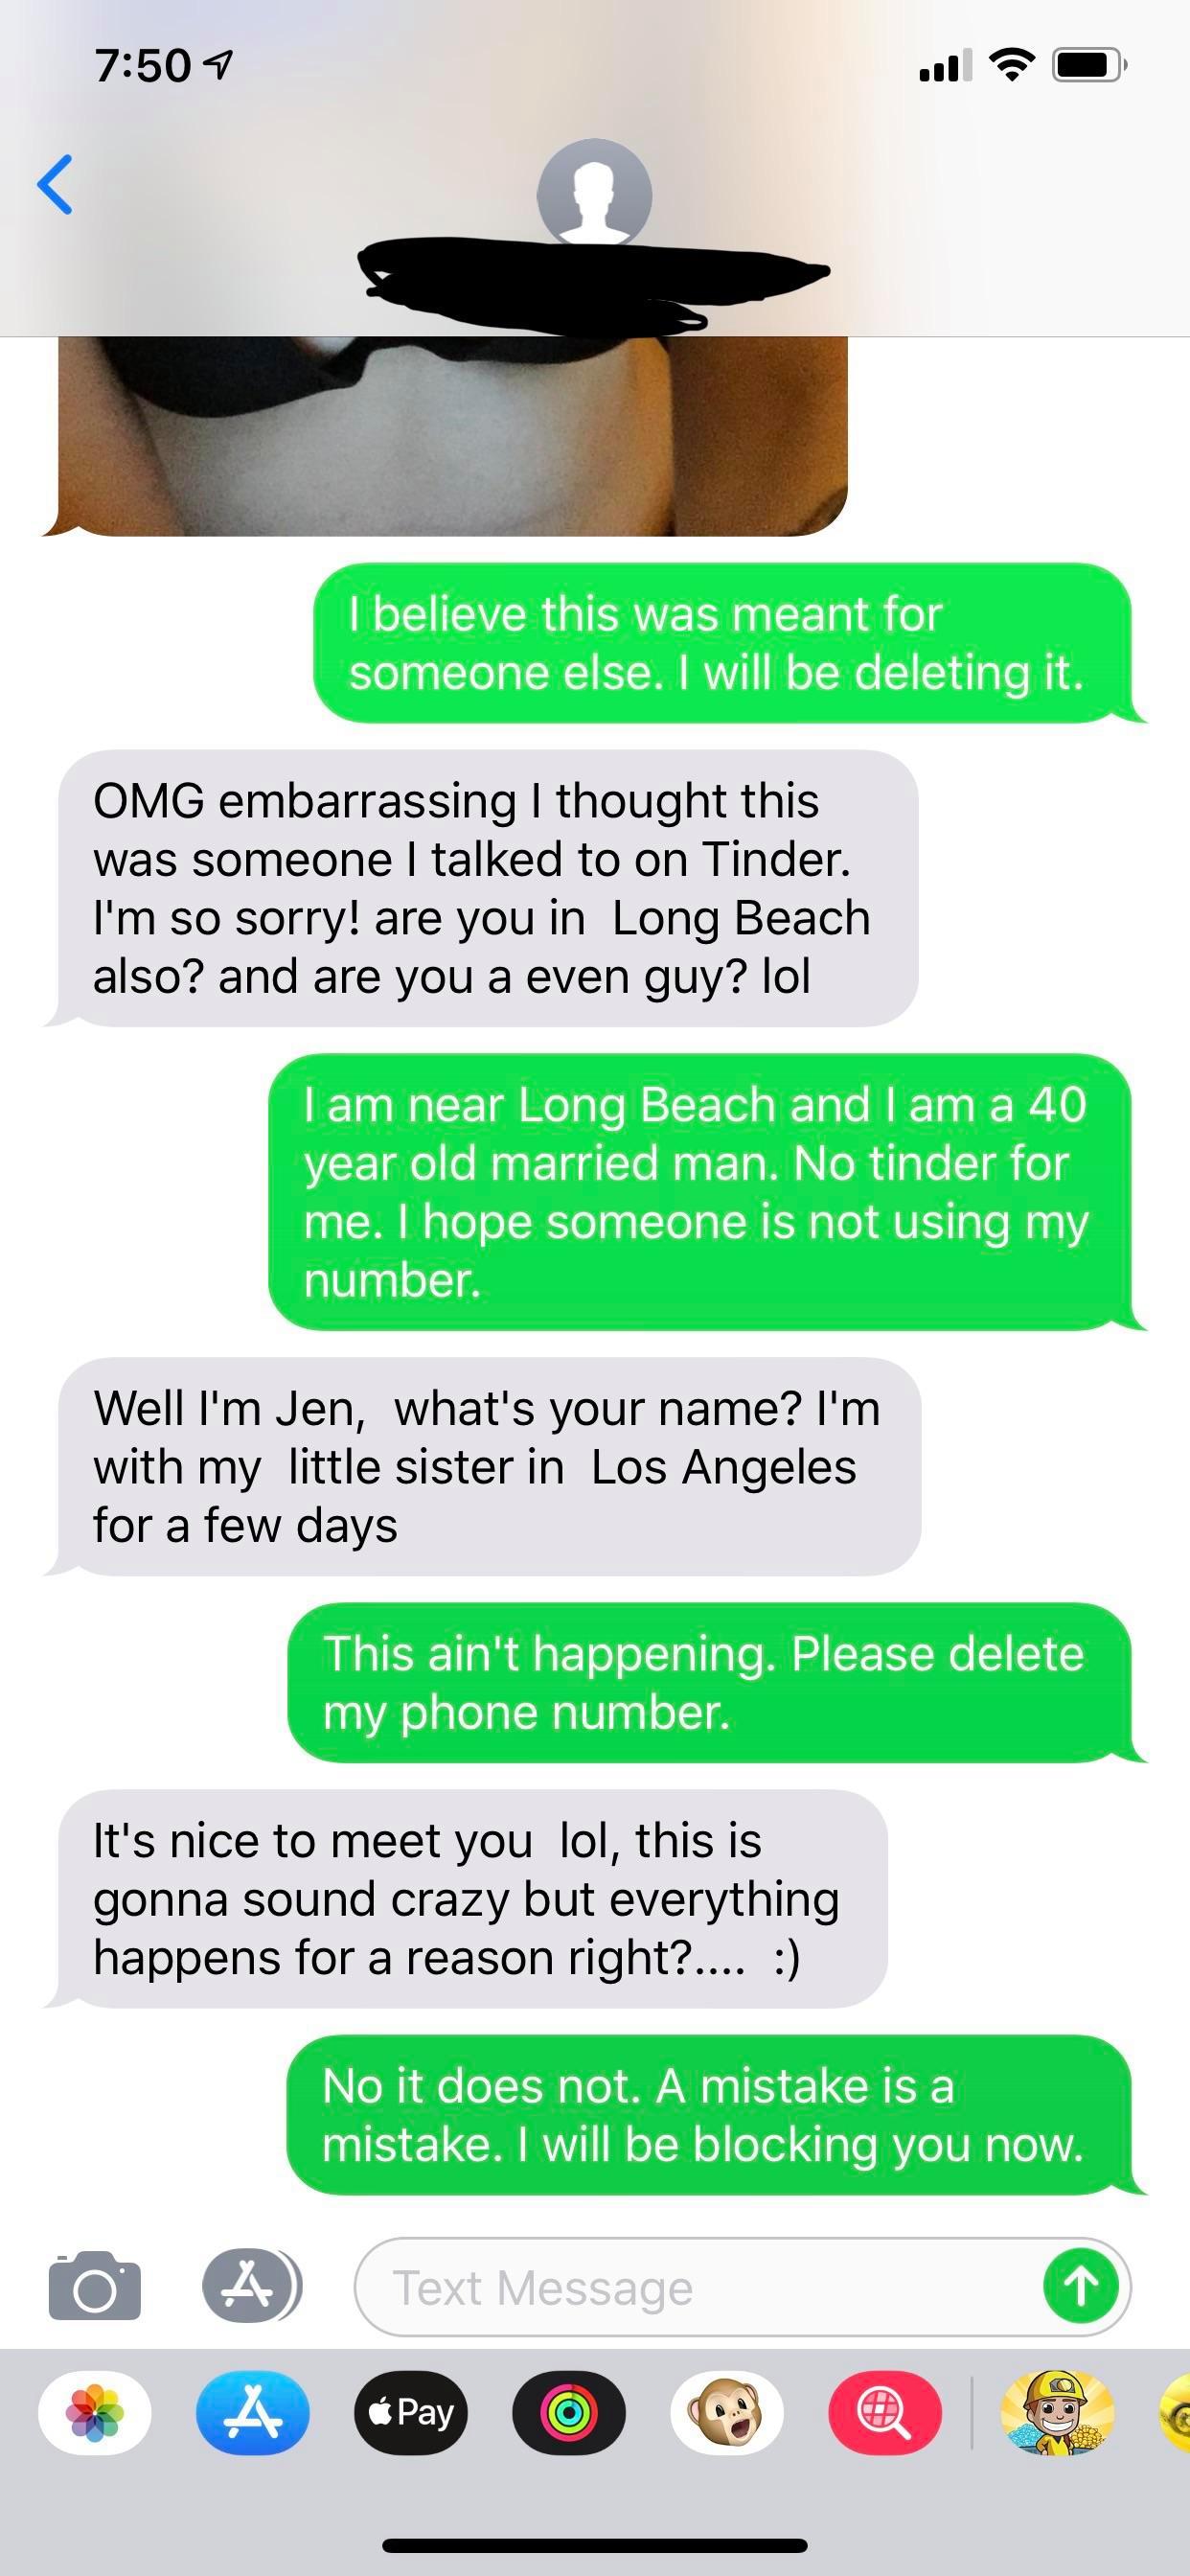 wrong number country puns - 7 I believe this was meant for someone else. I will be deleting it. Omg embarrassing I thought this was someone I talked to on Tinder. I'm so sorry! are you in Long Beach also? and are you a even guy? lol I am near Long Beach a